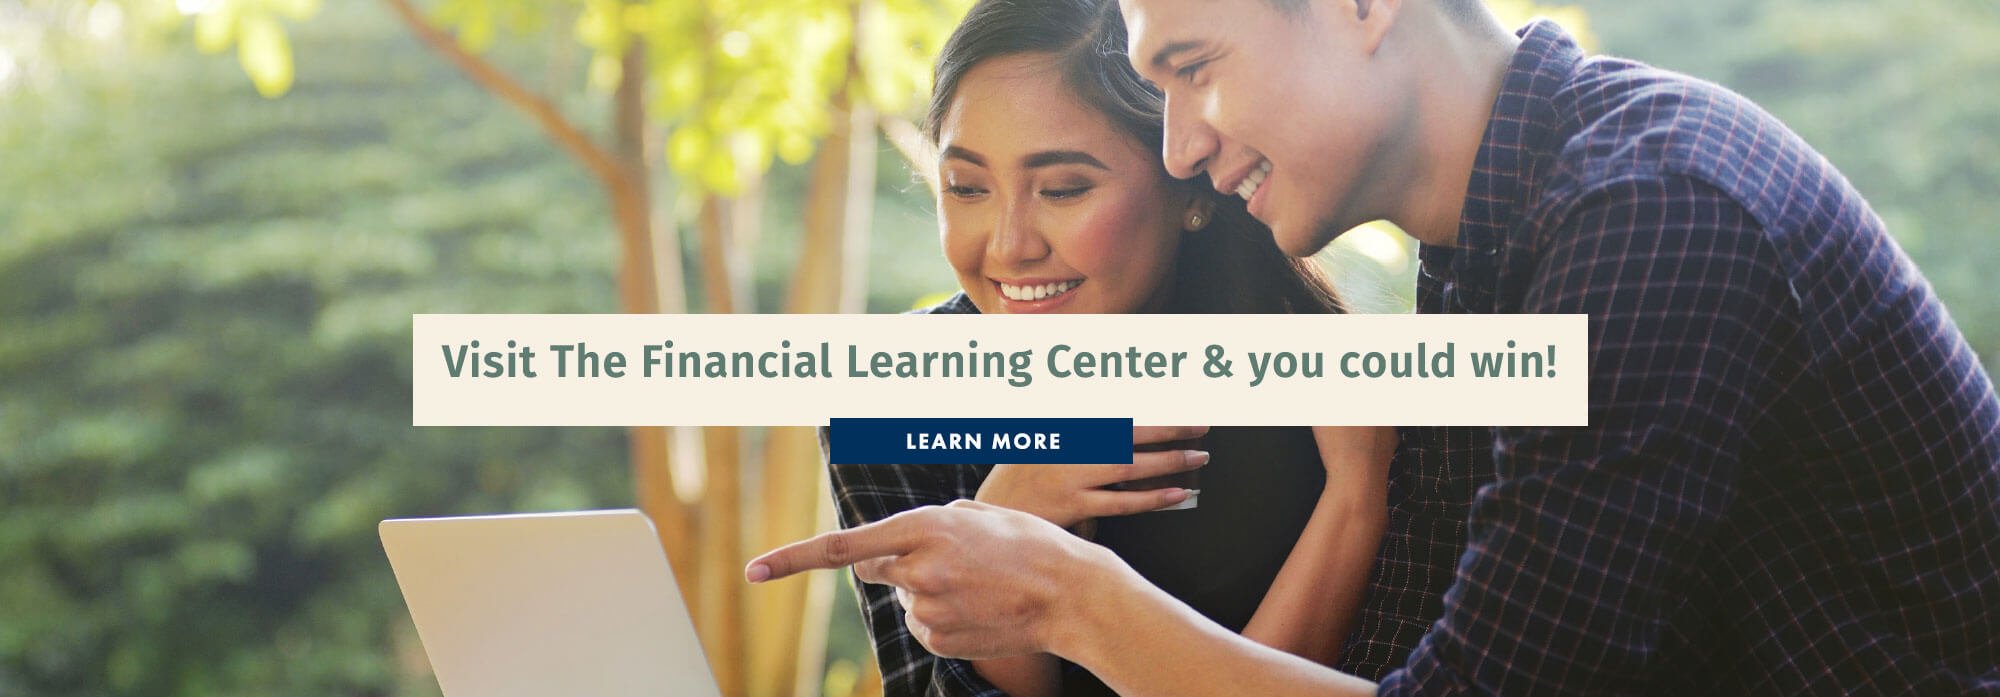 Visit The Financial Learning Center & you could win!